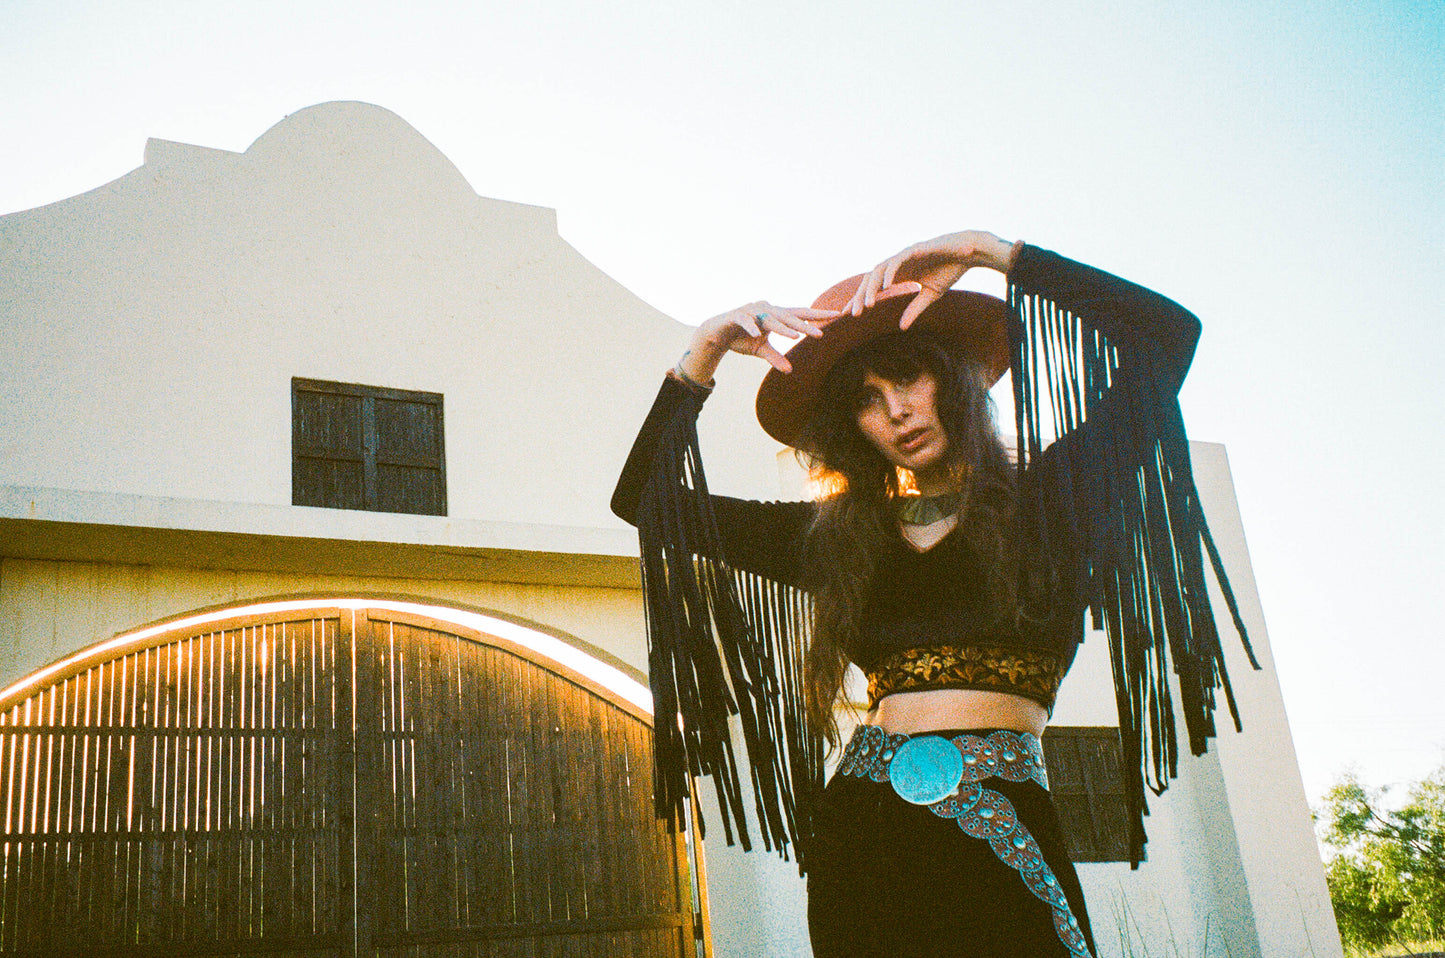 The Orchid Fringe Black Crop Top in Gold Dust Woman